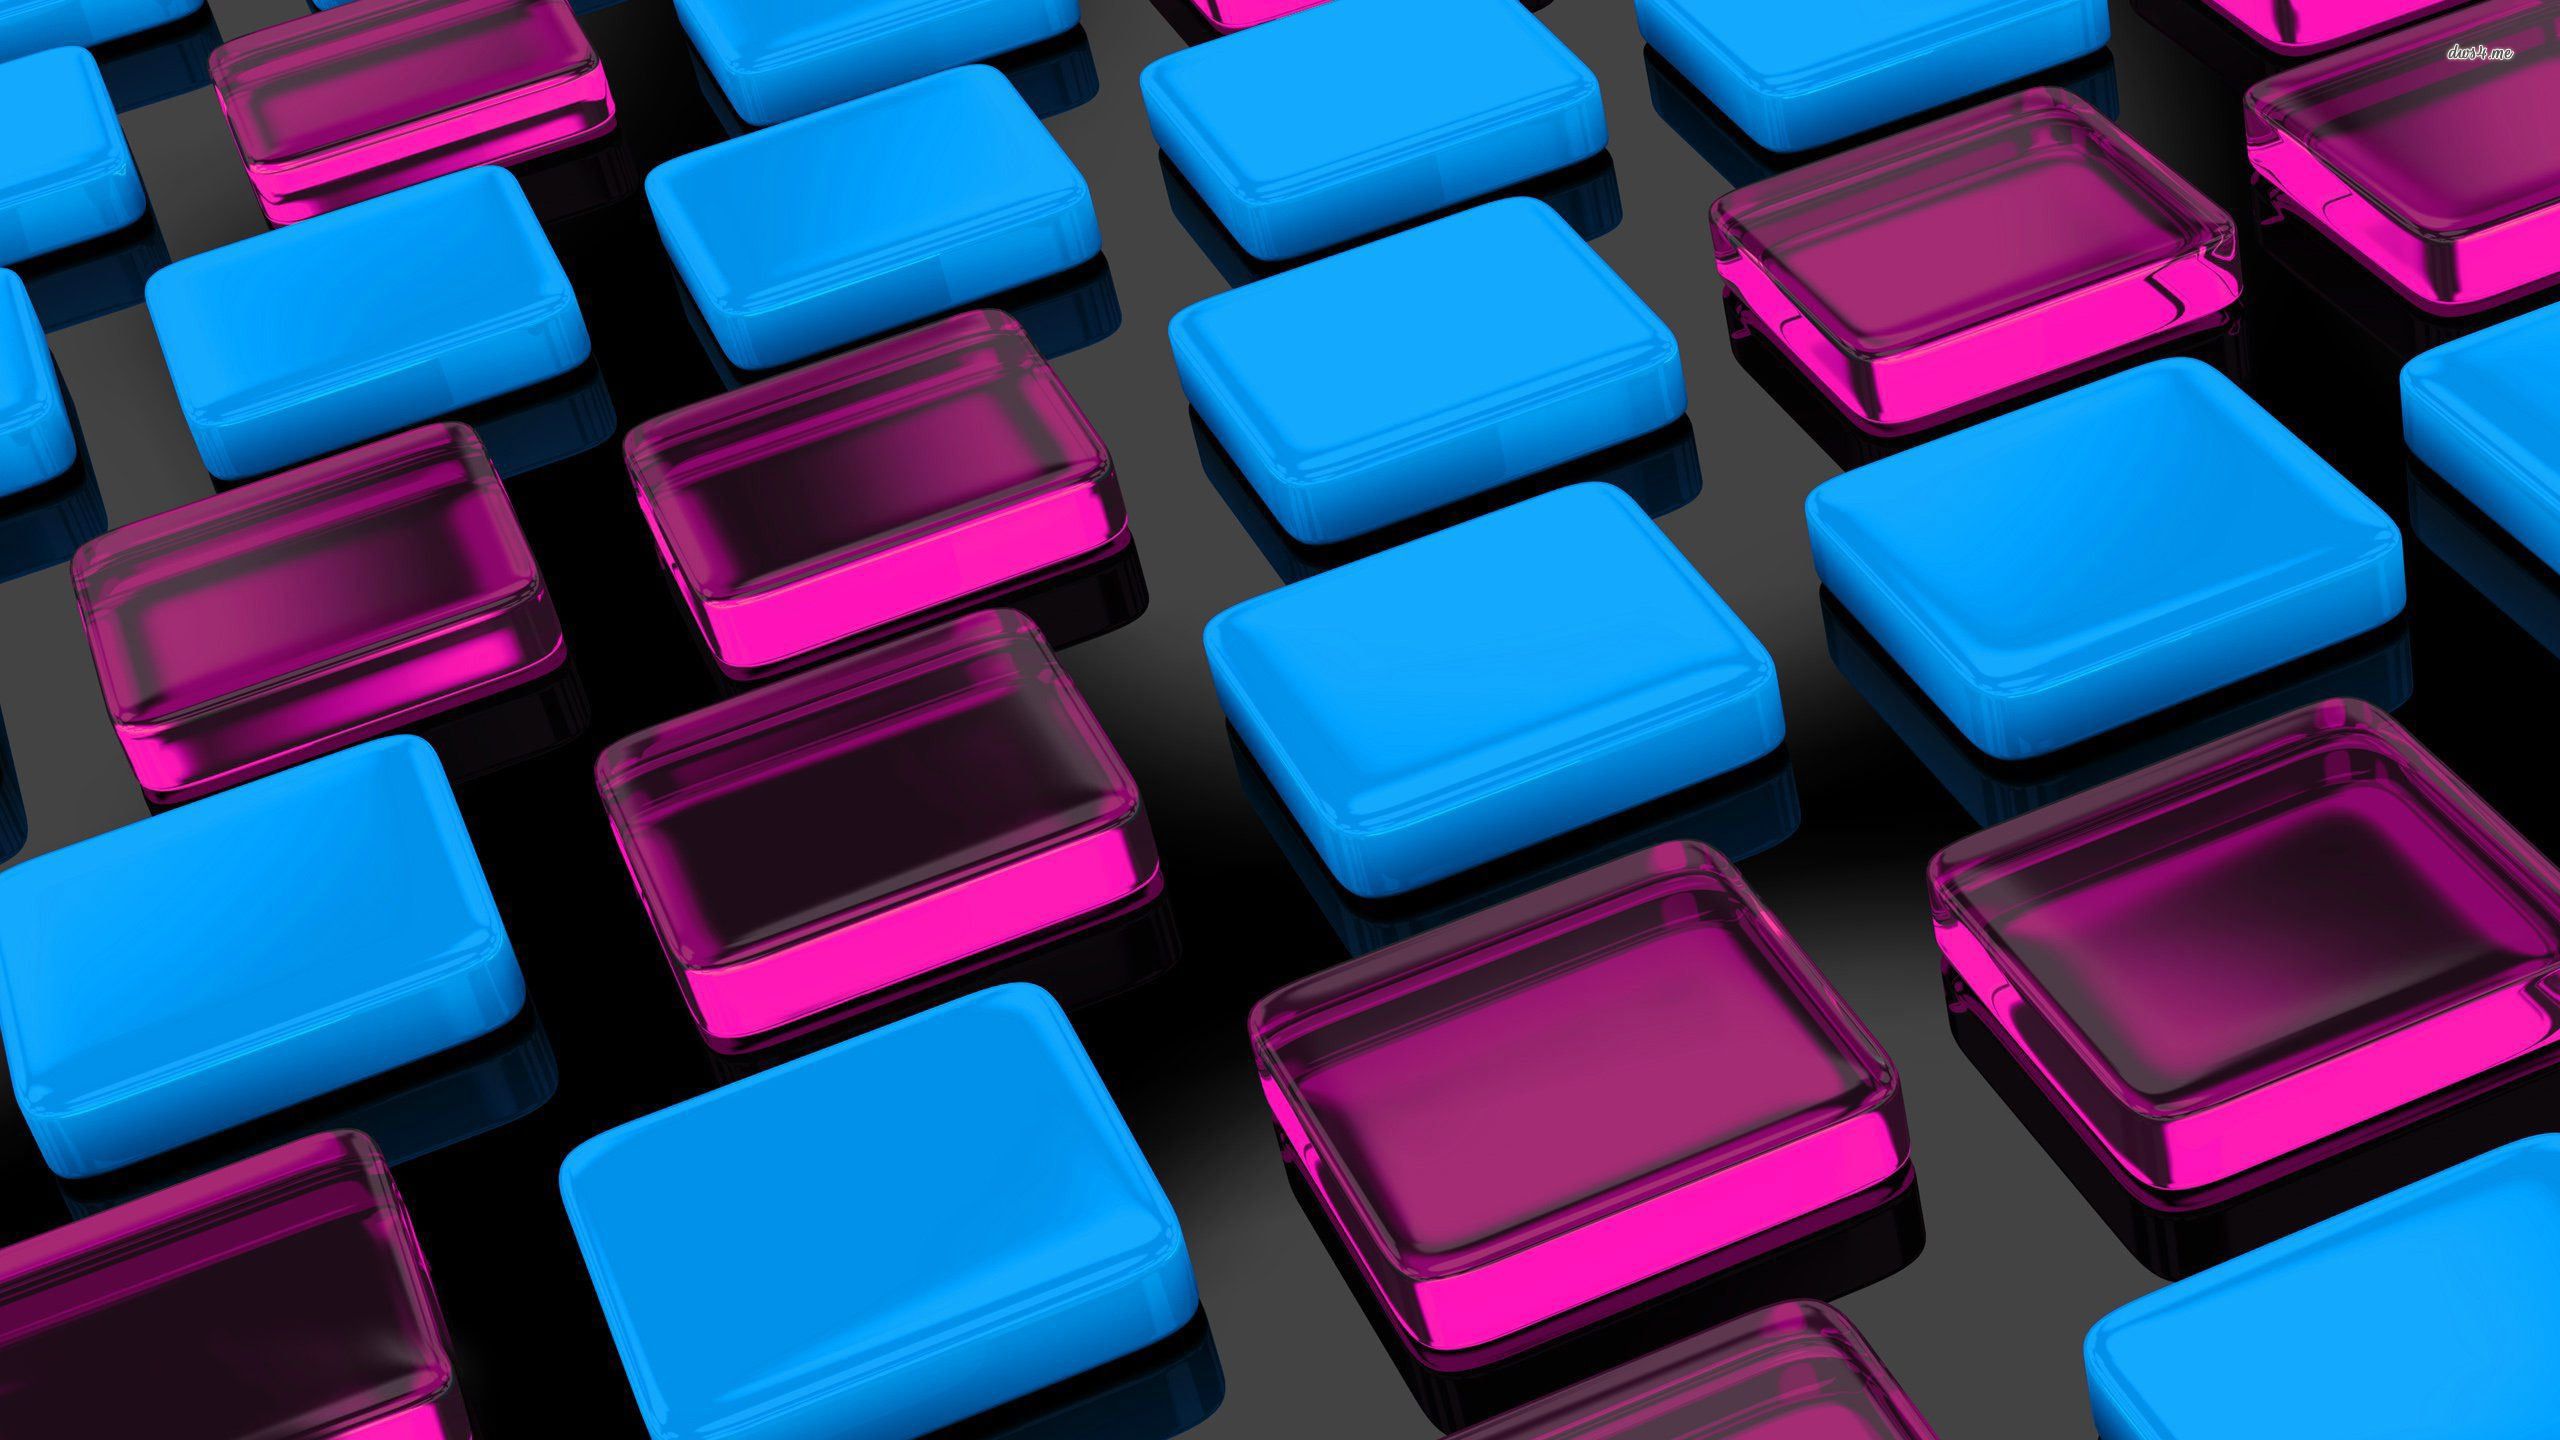 Pink and blue cuboids wallpaper - 3D wallpapers - #26788